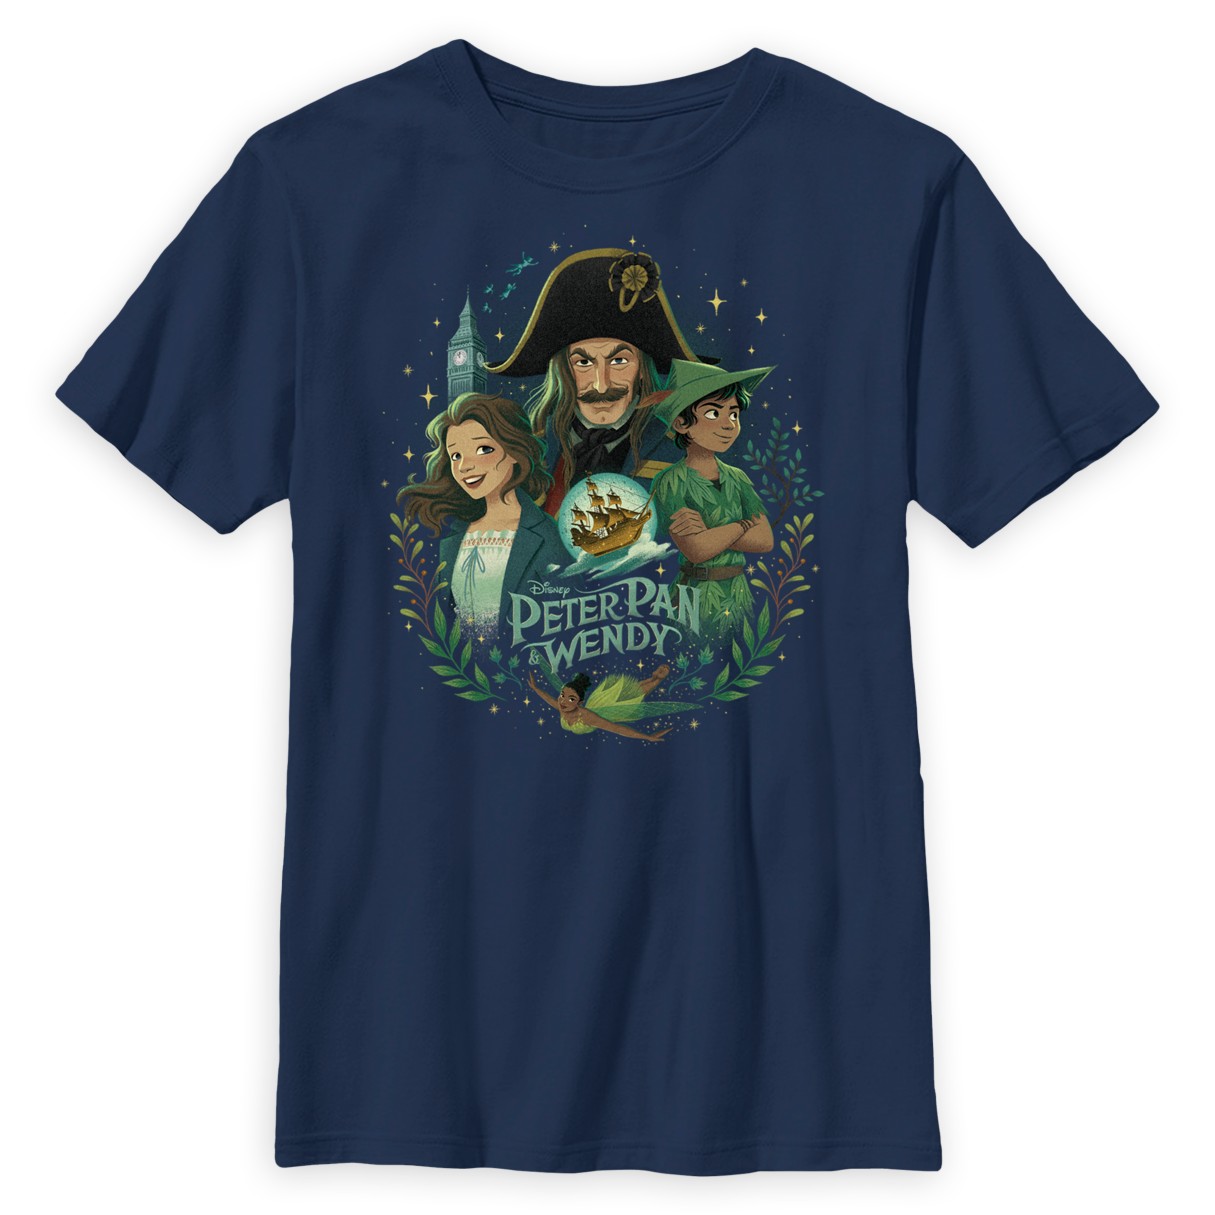 Peter Pan & Wendy Cast T-Shirt for Kids – Live Action Film